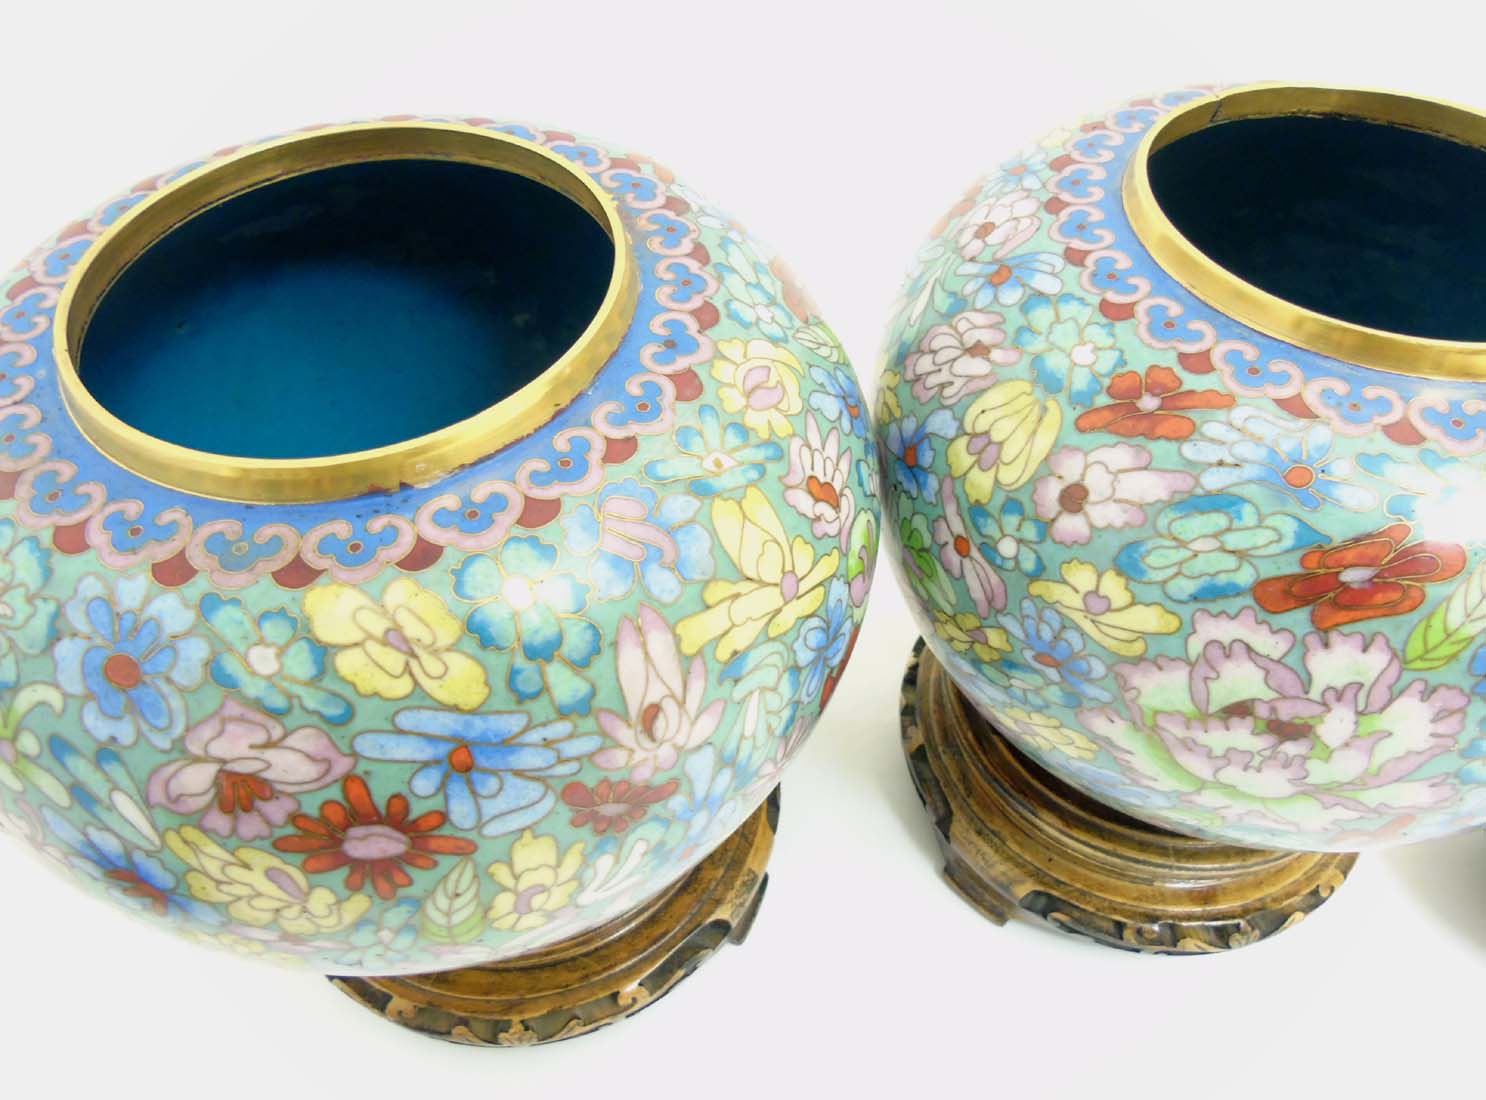 A pair of cloisonne gilt brass Ginger jars on stands with floral decoration. - Image 9 of 9